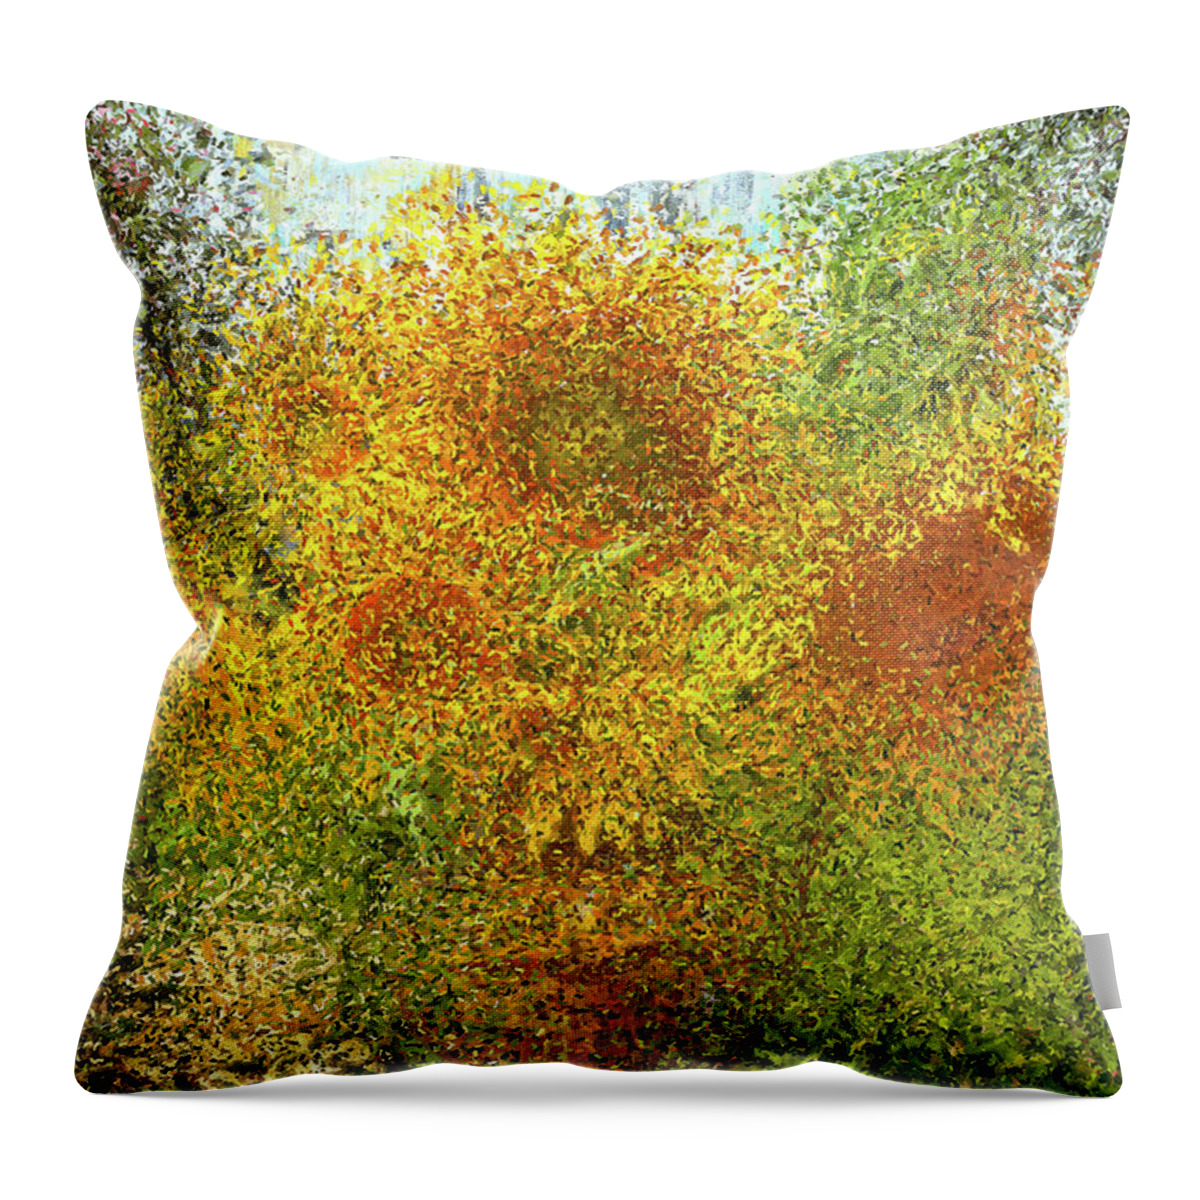 Sunflowers Throw Pillow featuring the painting Sunflowers by Alex Mir